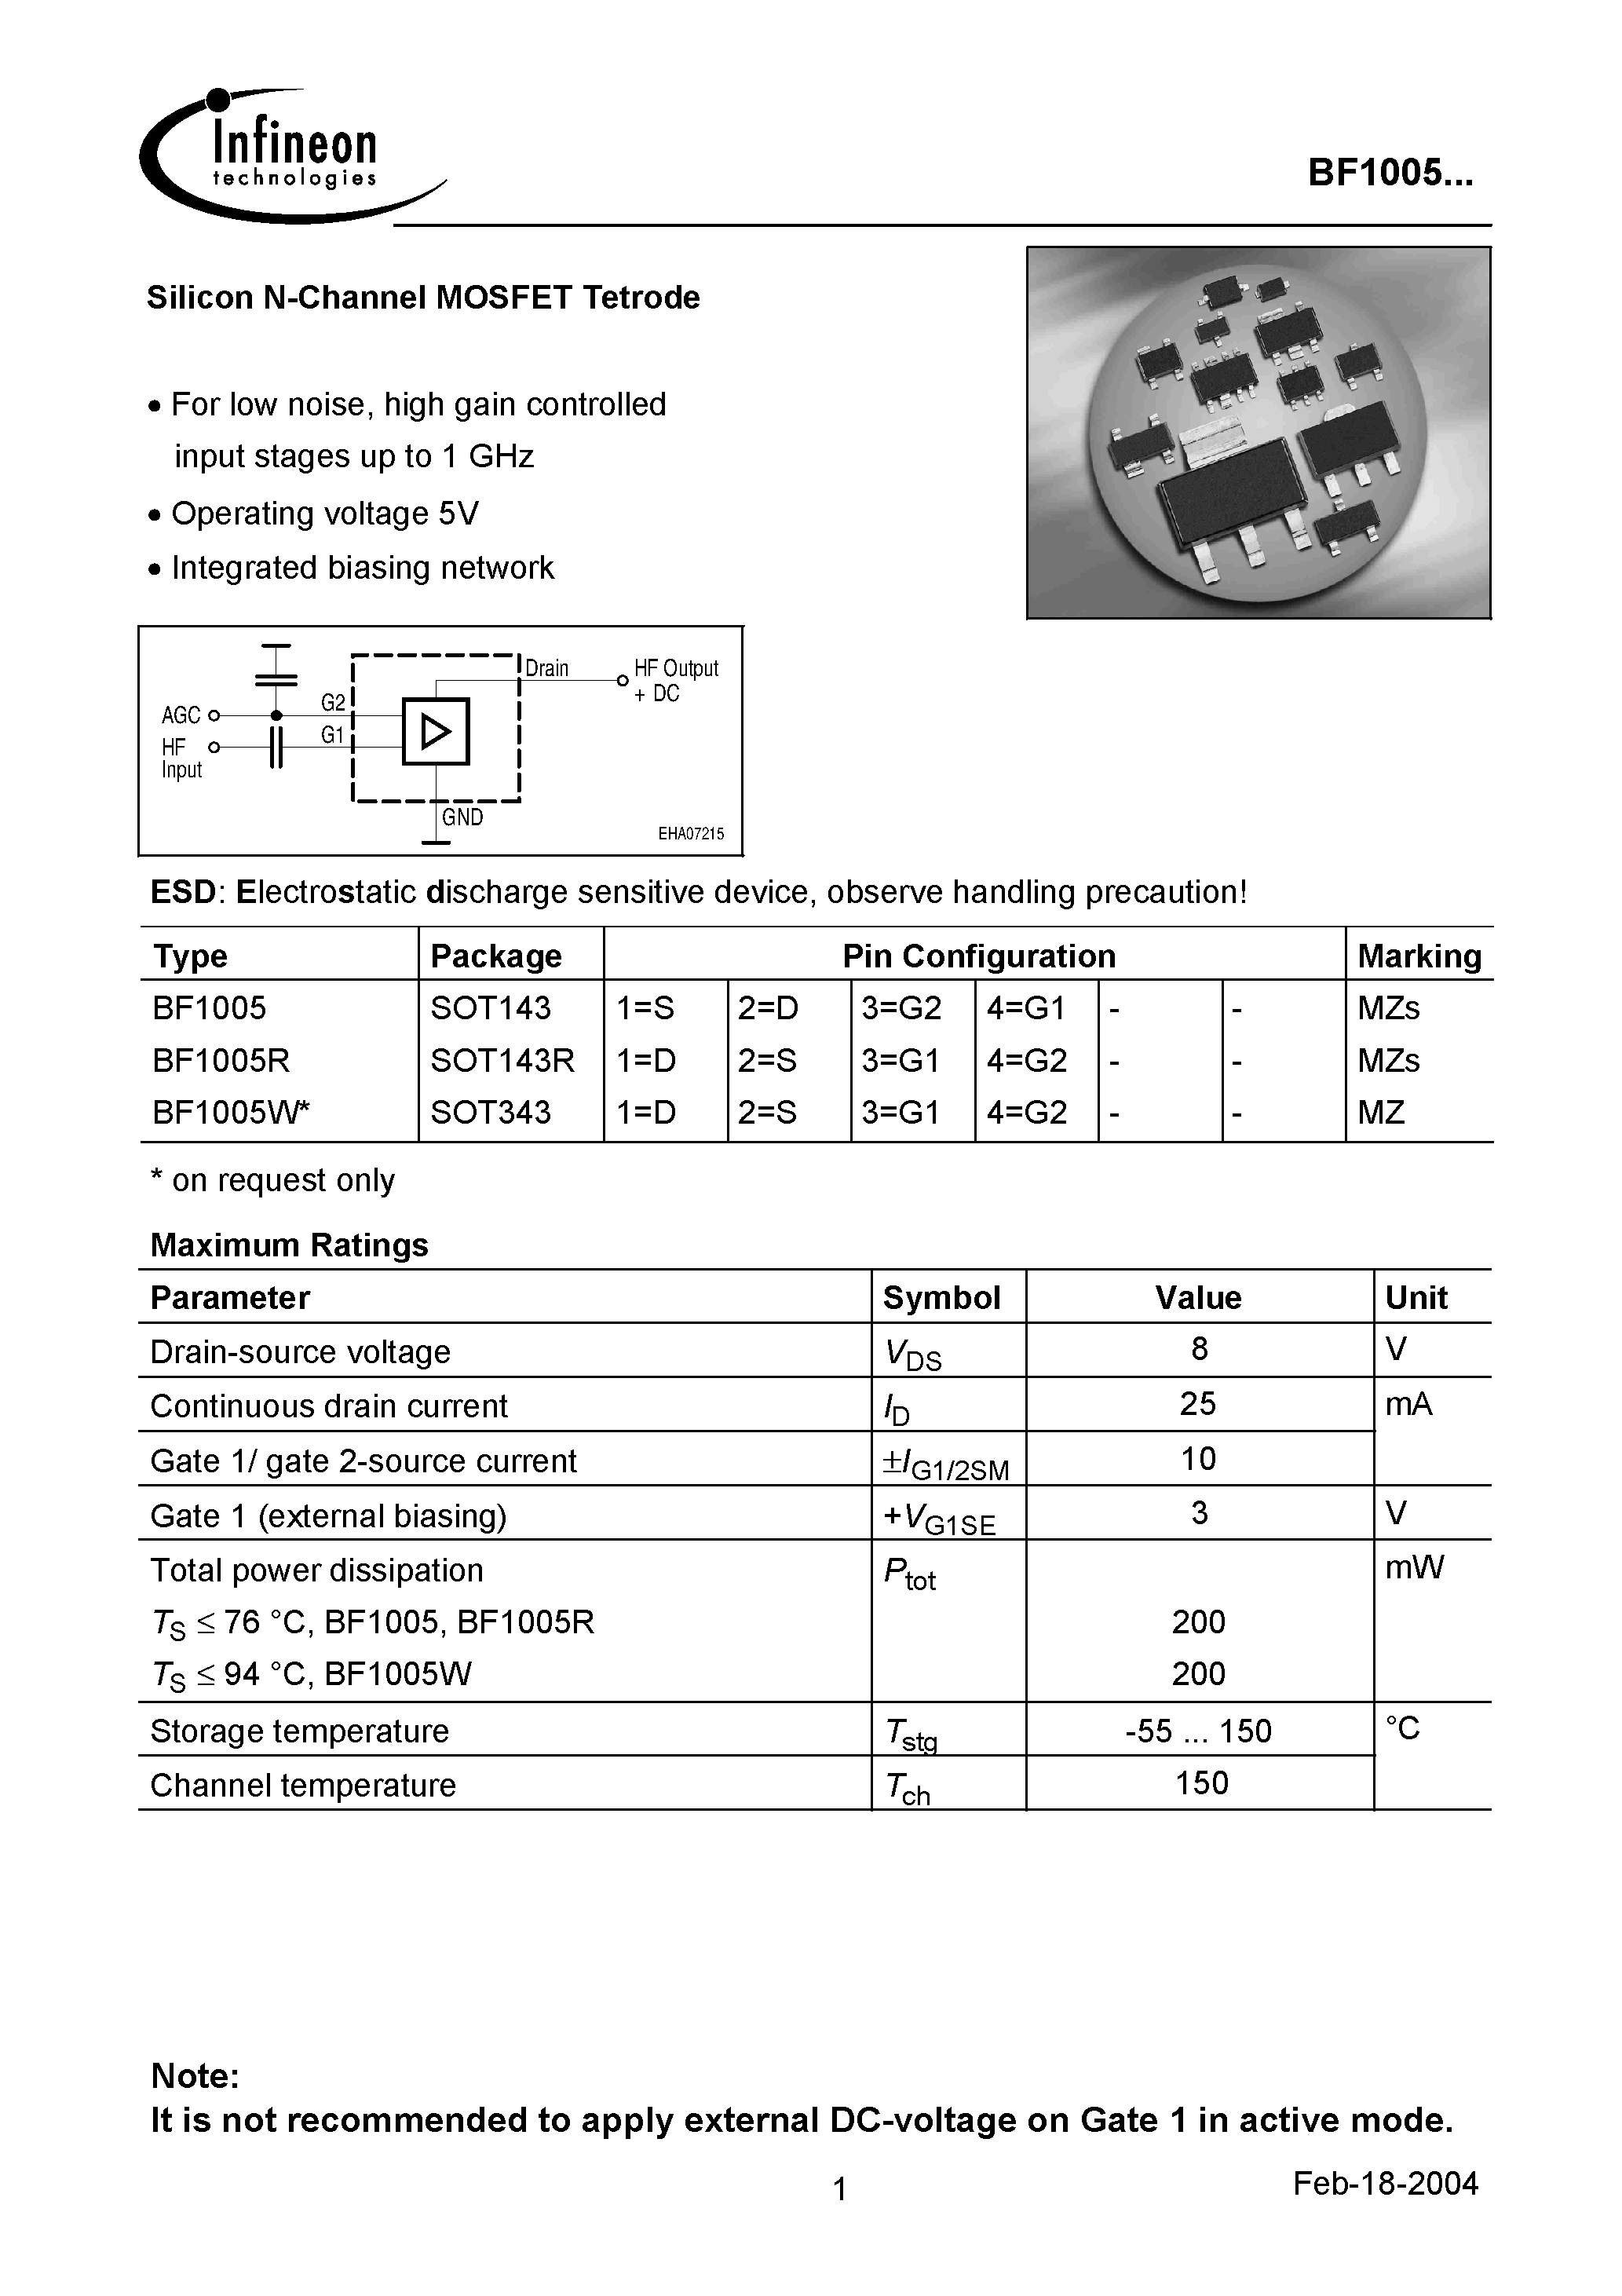 Datasheet BF1005W - Silicon N-Channel MOSFET Tetrode page 1